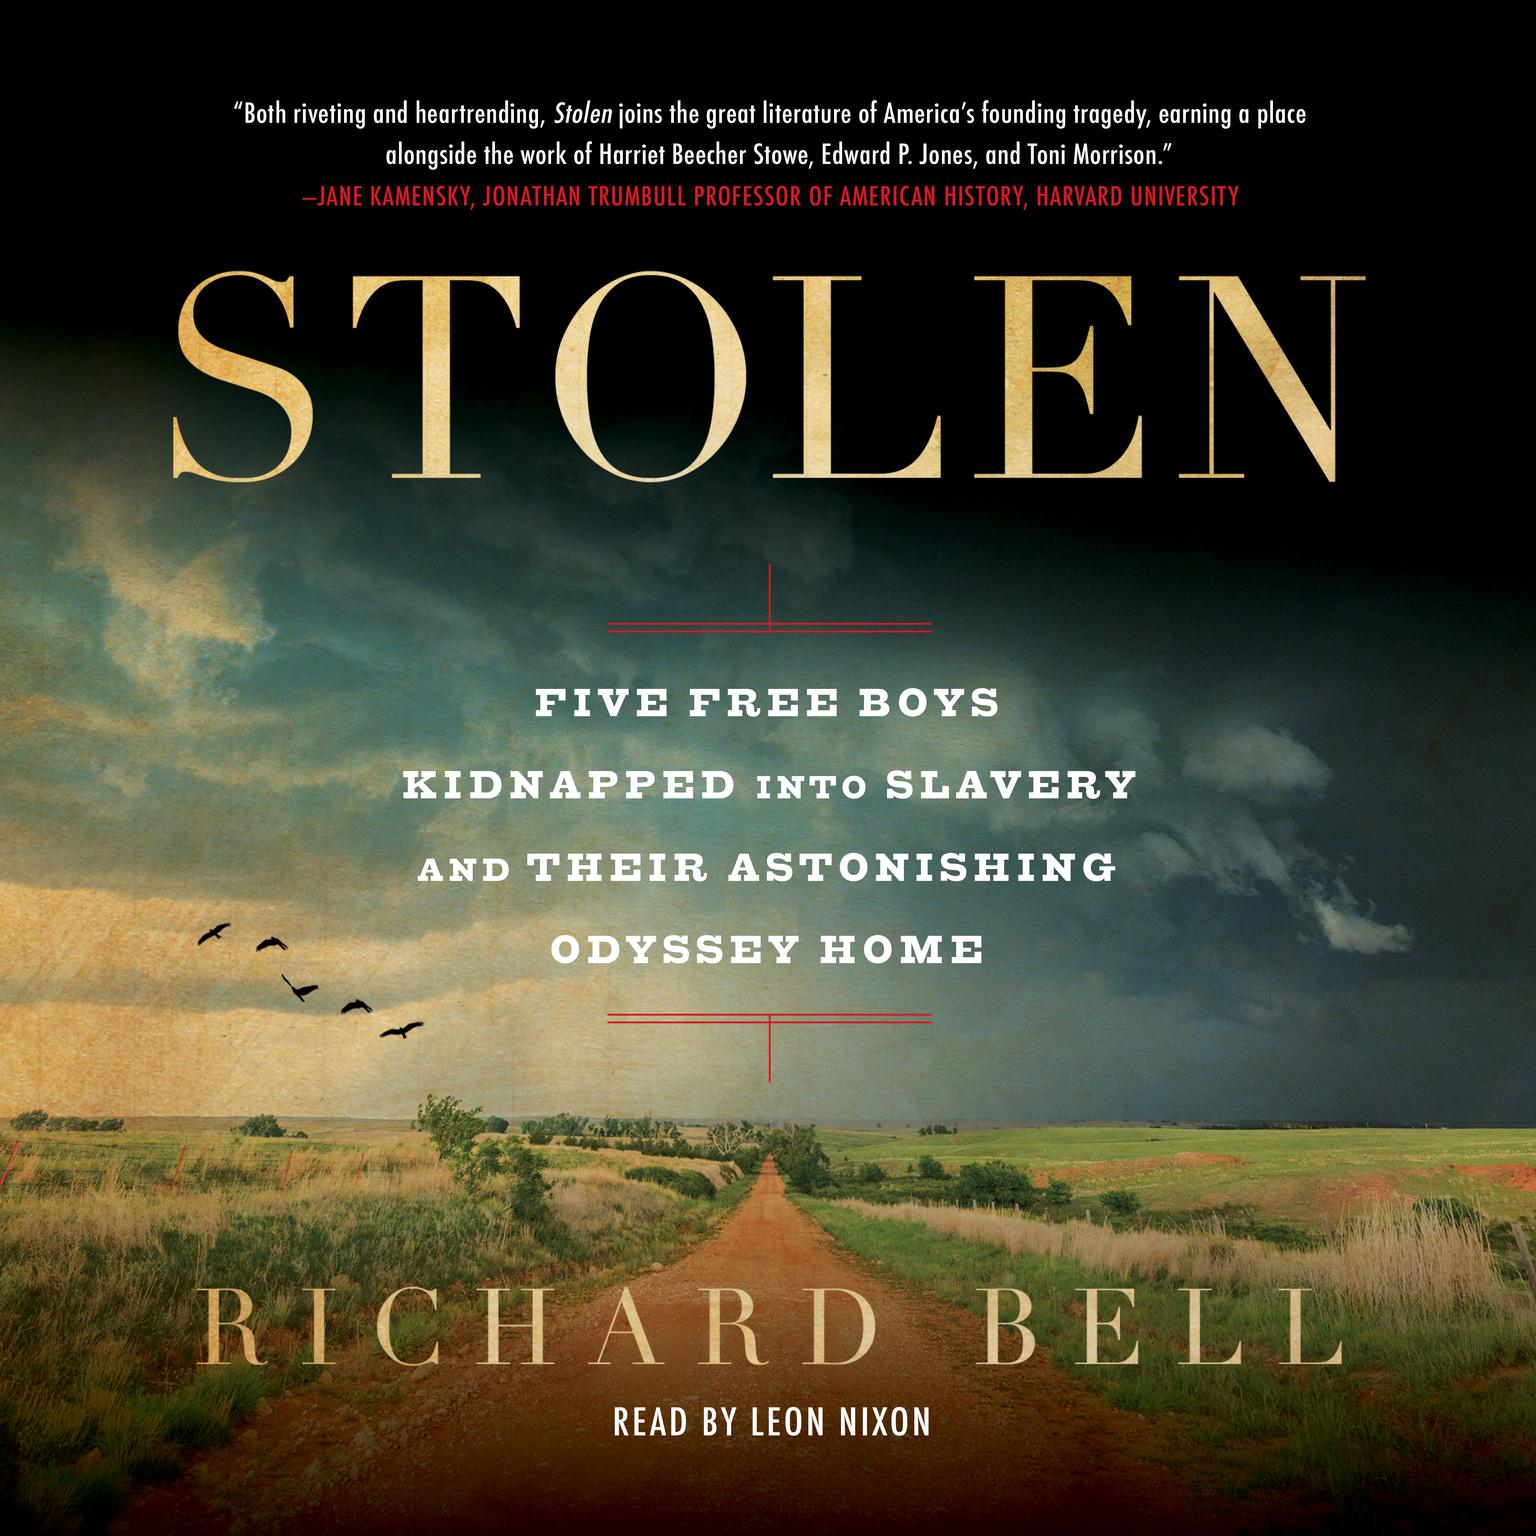 Stolen: Five Free Boys Kidnapped into Slavery and Their Astonishing Odyssey Home Audiobook, by Richard Bell